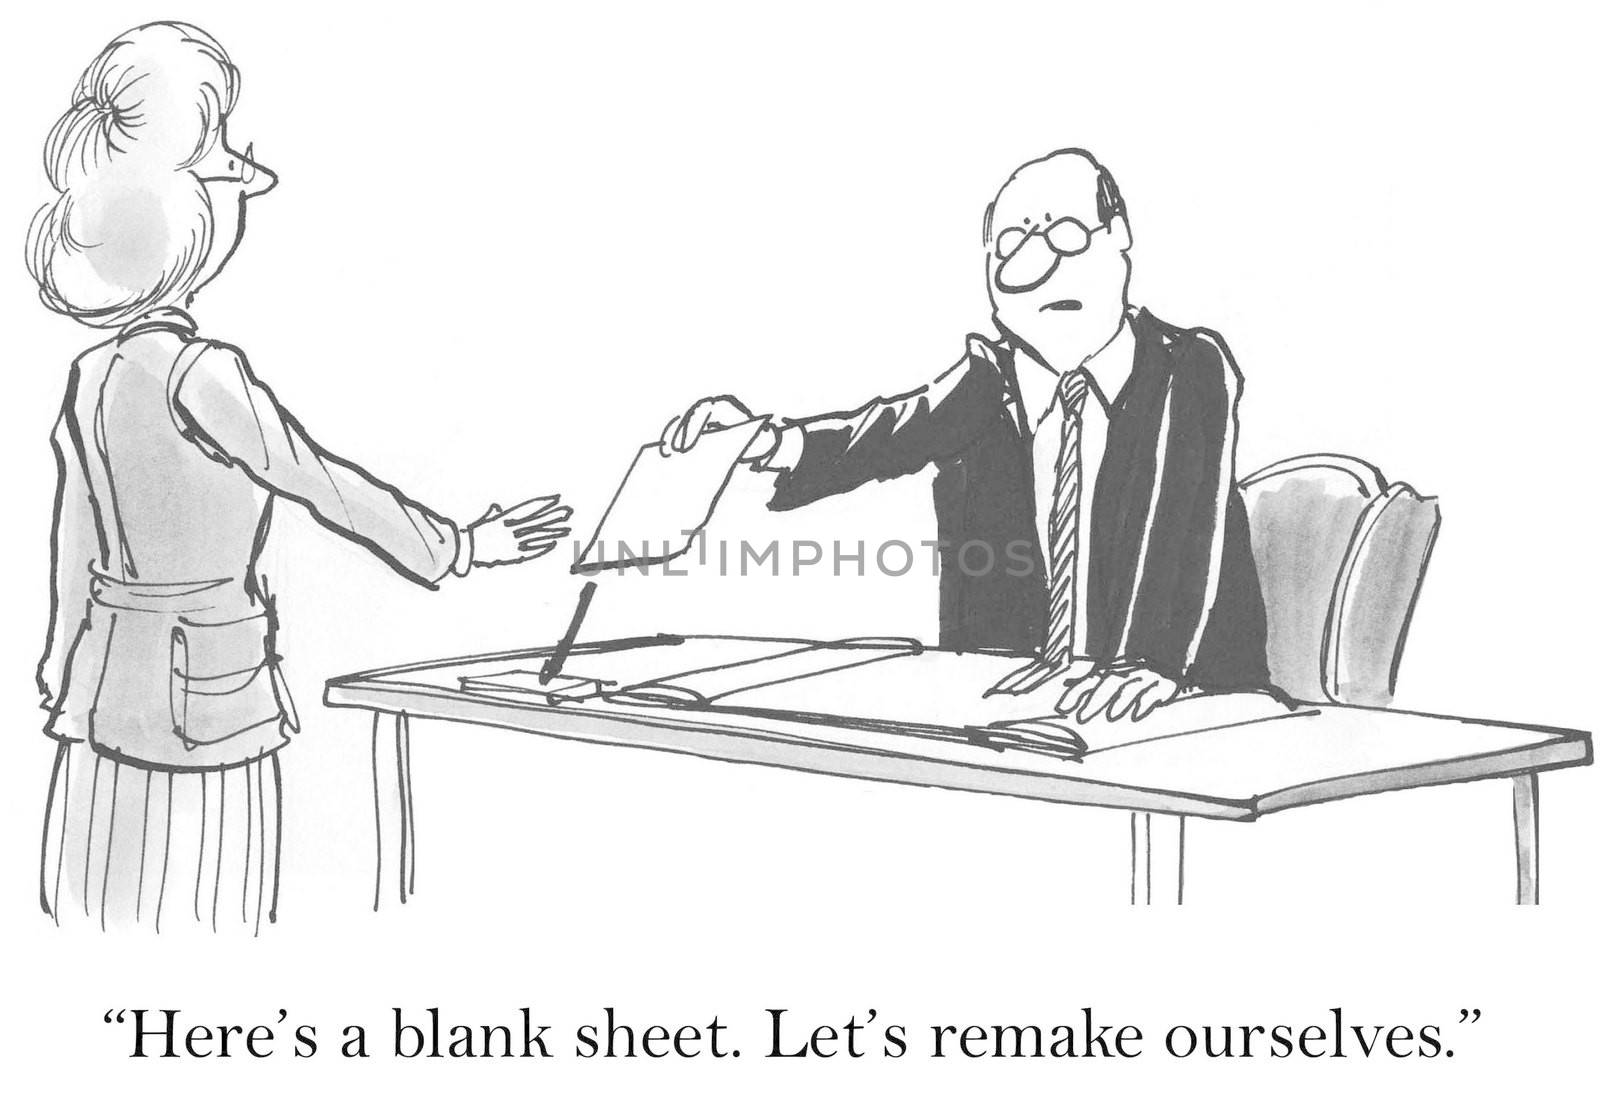 "Here's a blank sheet. Let's remake ourselves."